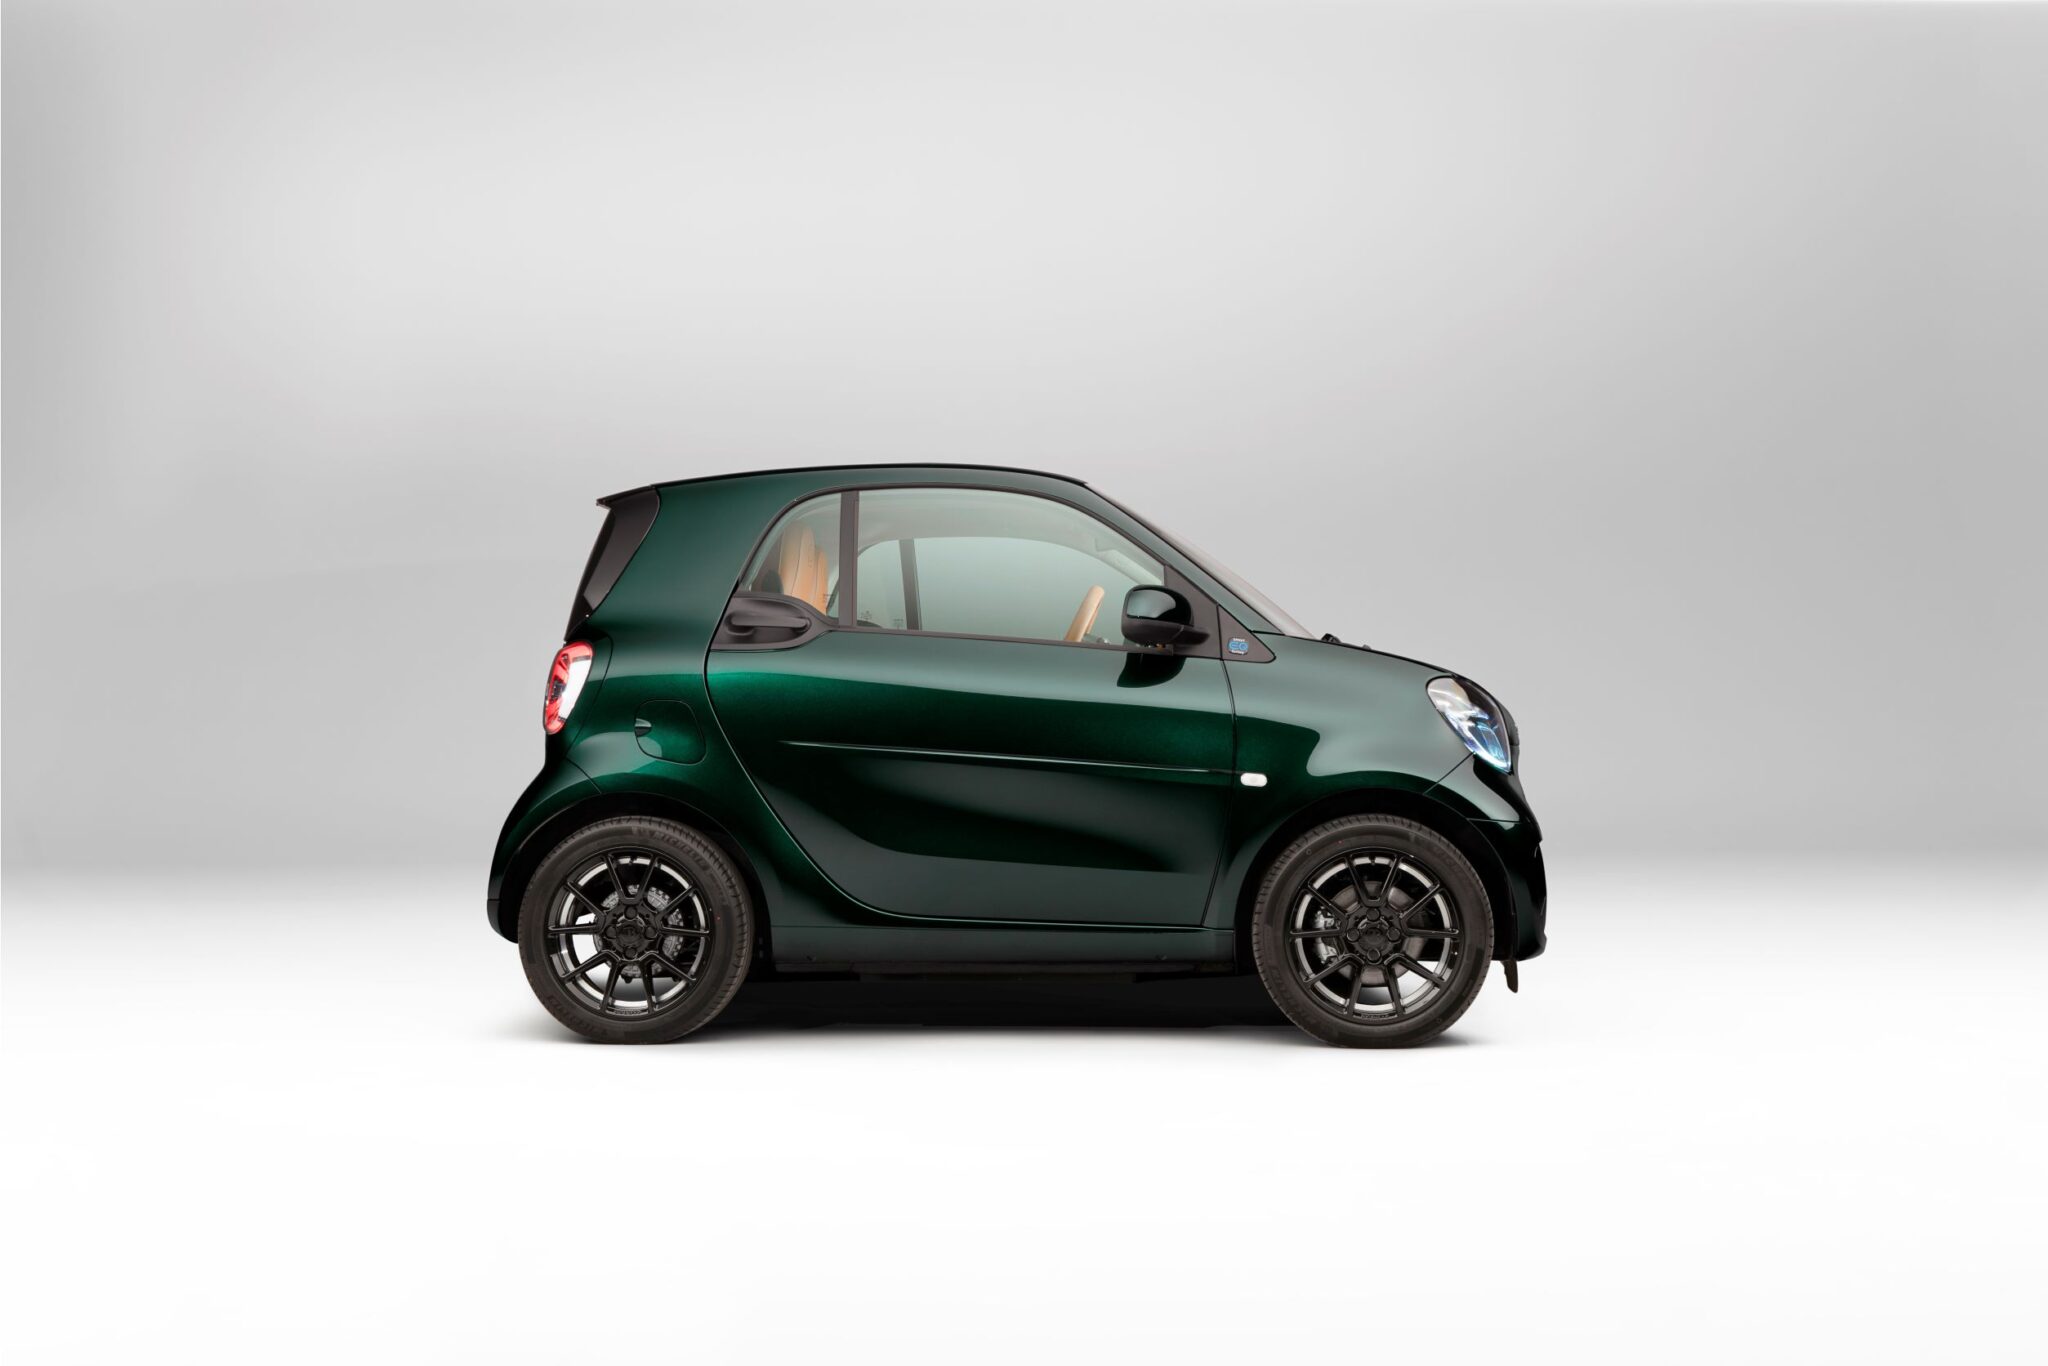 smart excited to reveal BRABUS-finished EQ fortwo coupé edition available to order from £25,495 OTR